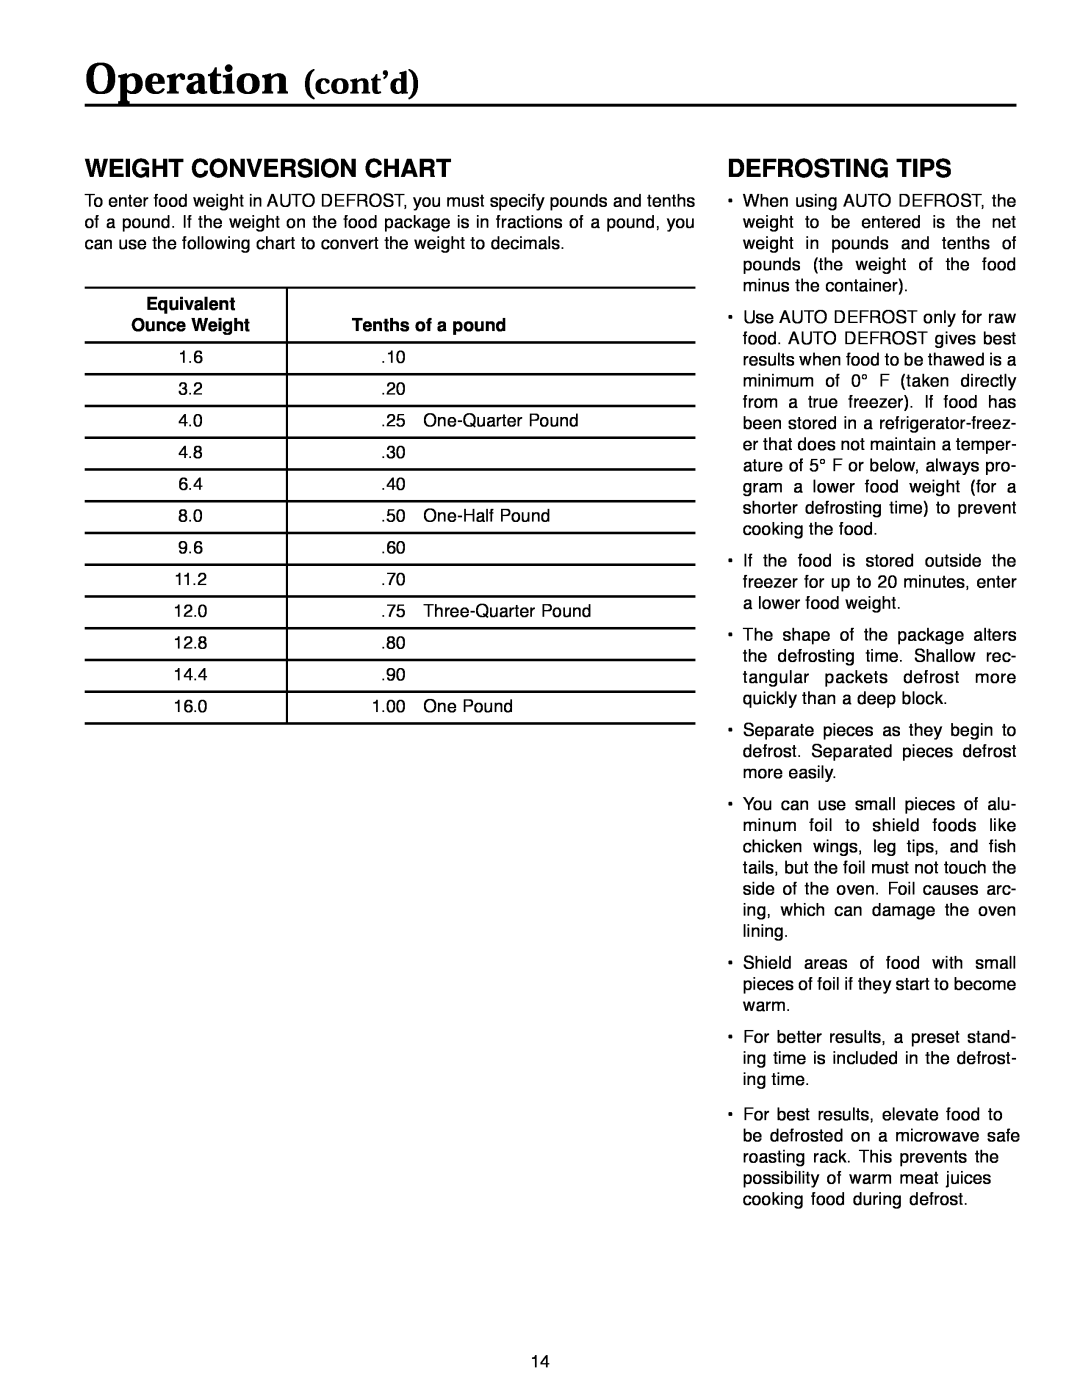 Maytag MMV4184AA owner manual Weight Conversion Chart, Defrosting Tips, Equivalent, Ounce Weight, Tenths of a pound 